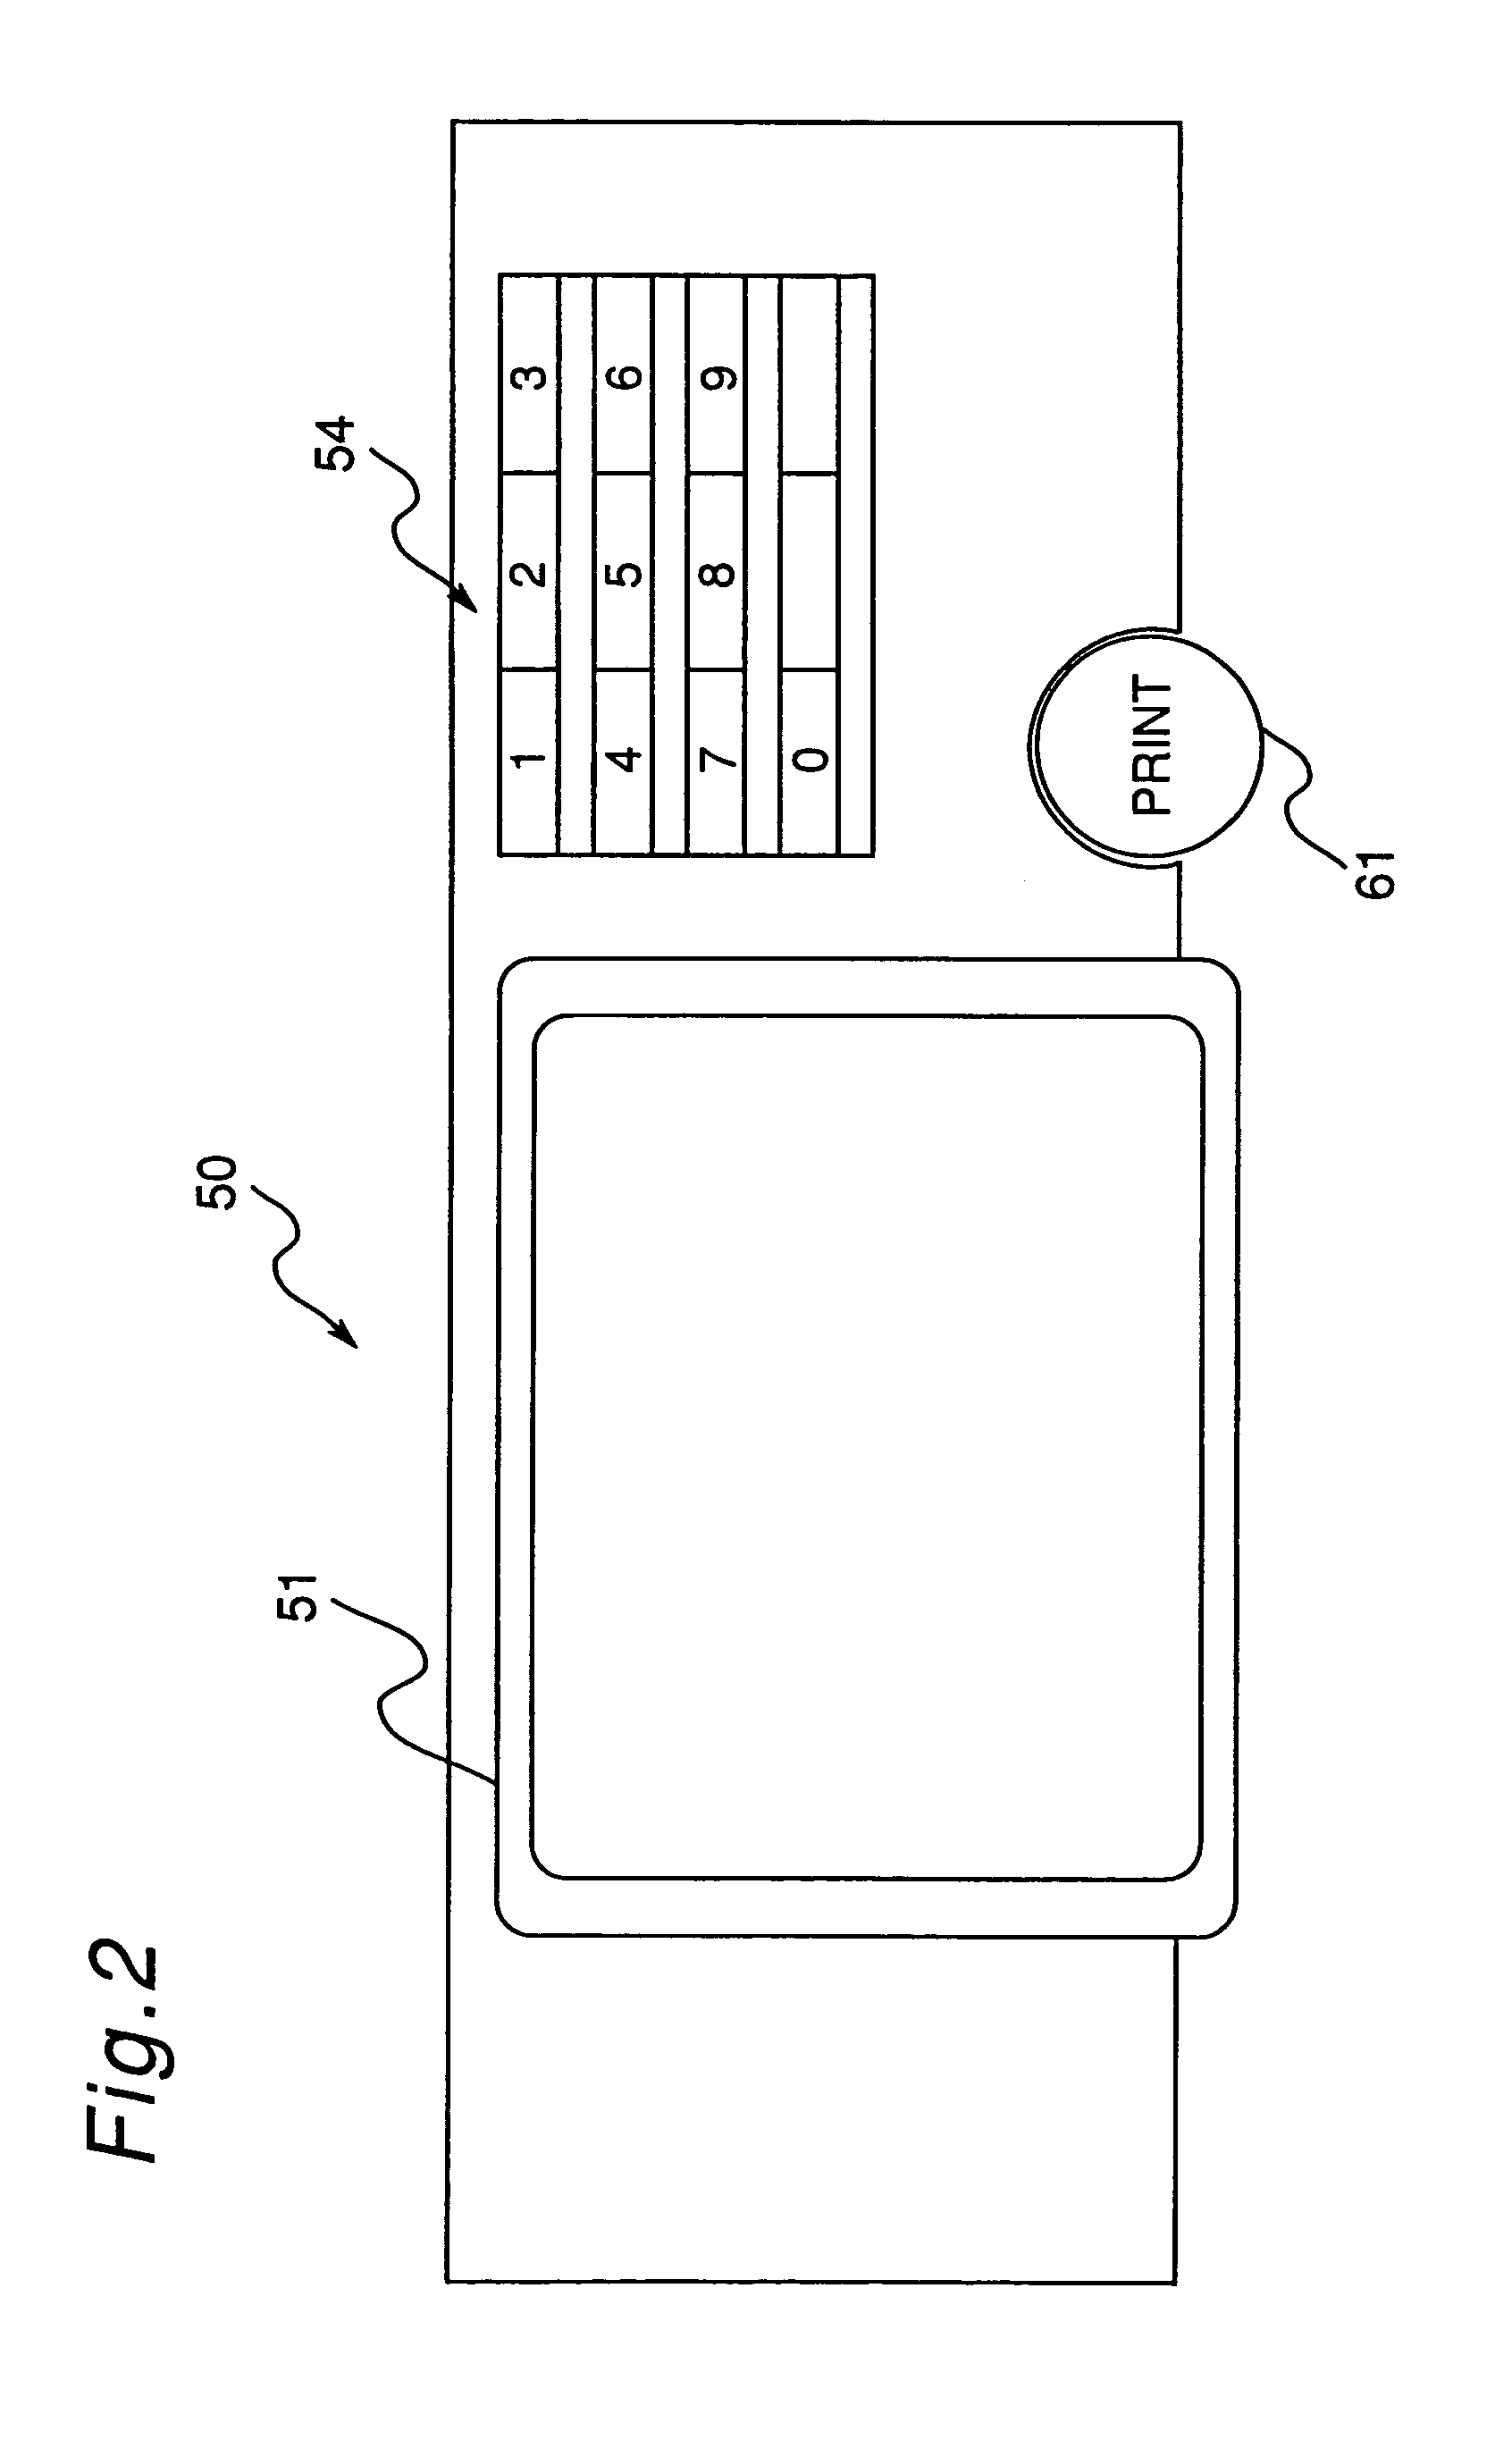 Image forming apparatus having a display changeable in color according to operational mode